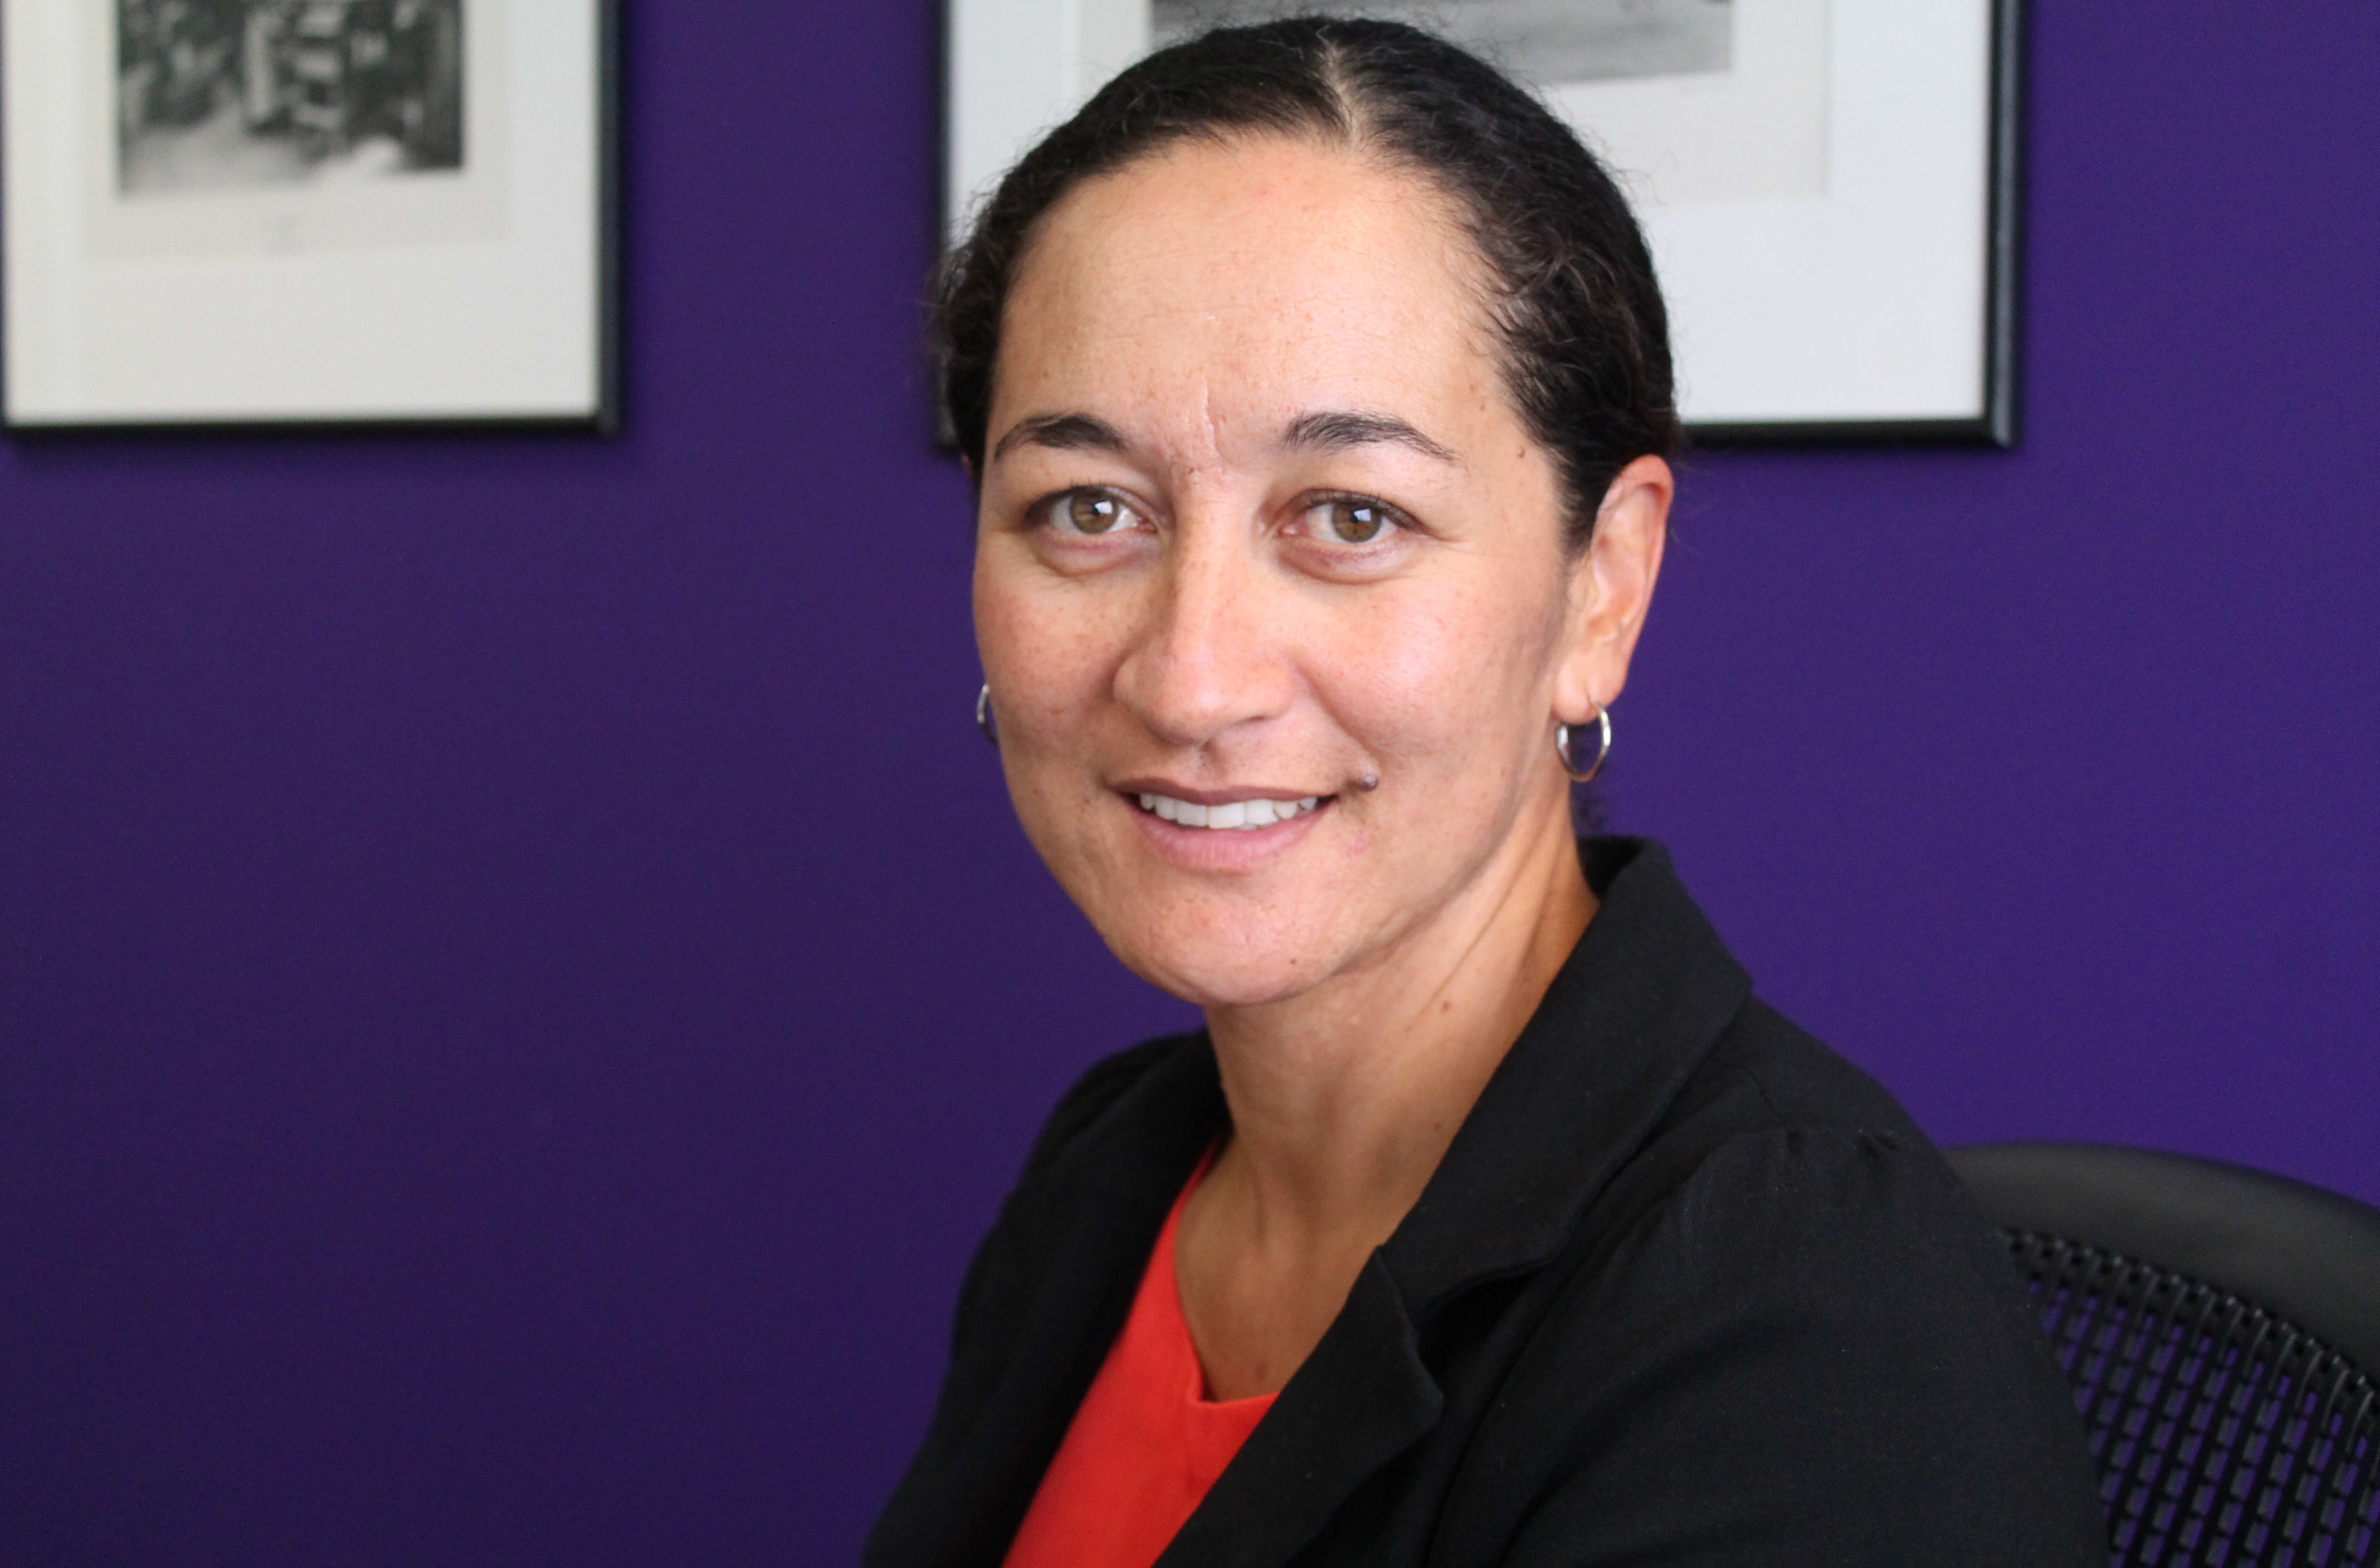 The Ministry for Women principal policy analyst Helen Potiki.